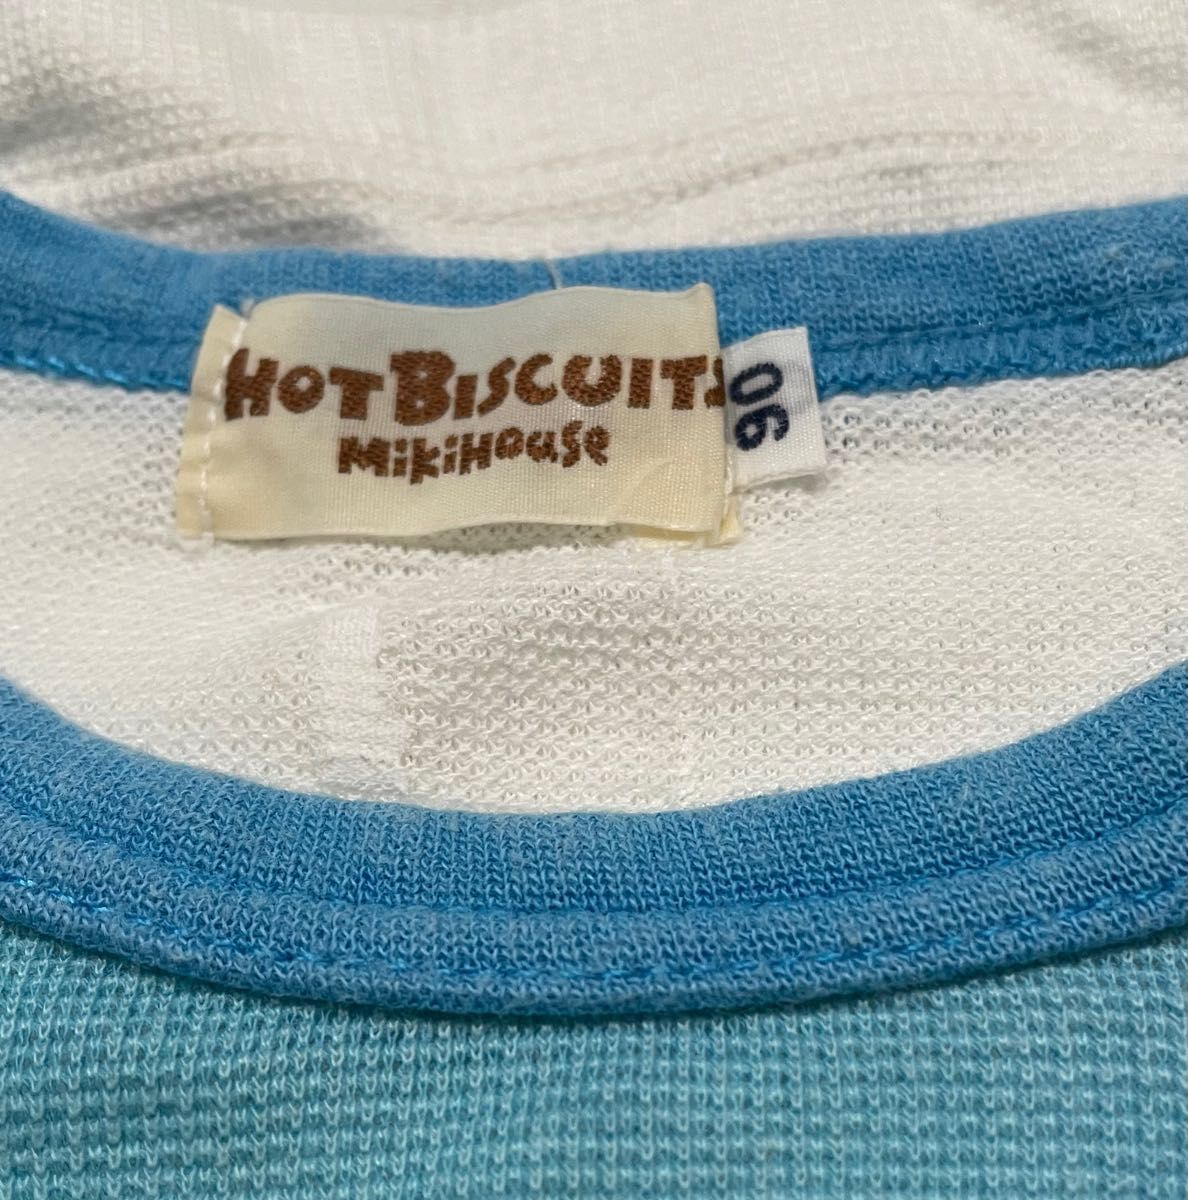 Hot Biscuits 半袖パジャマ90㌢